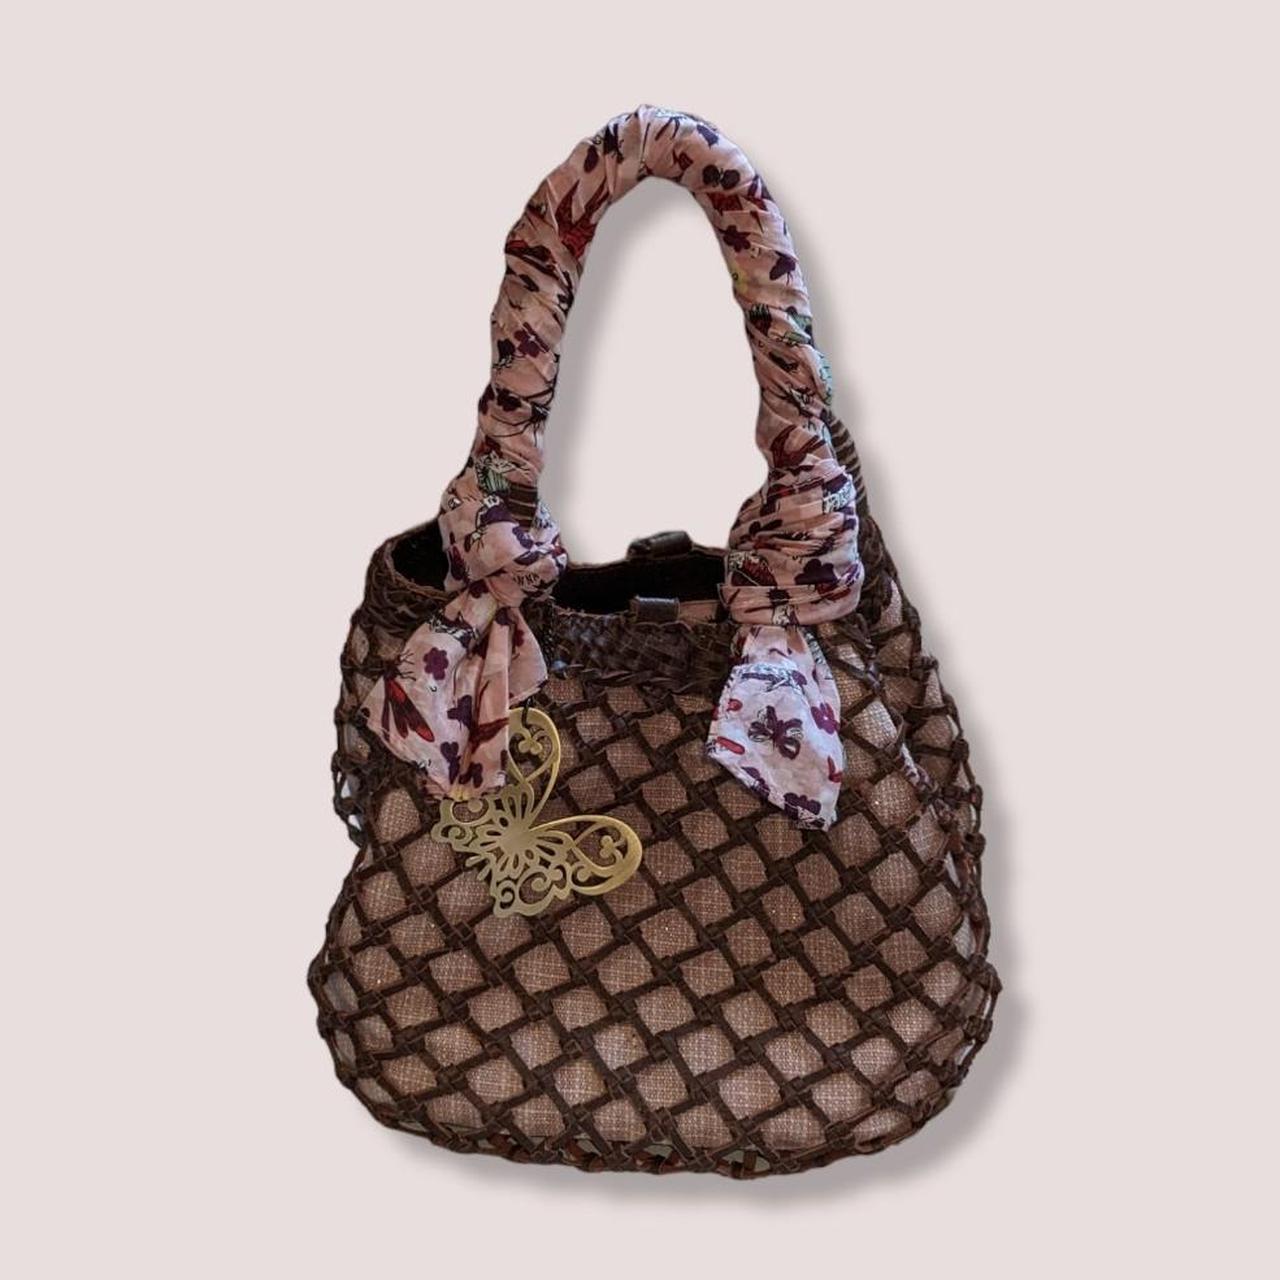 Anna Sui Women's Pink and Brown Bag (2)